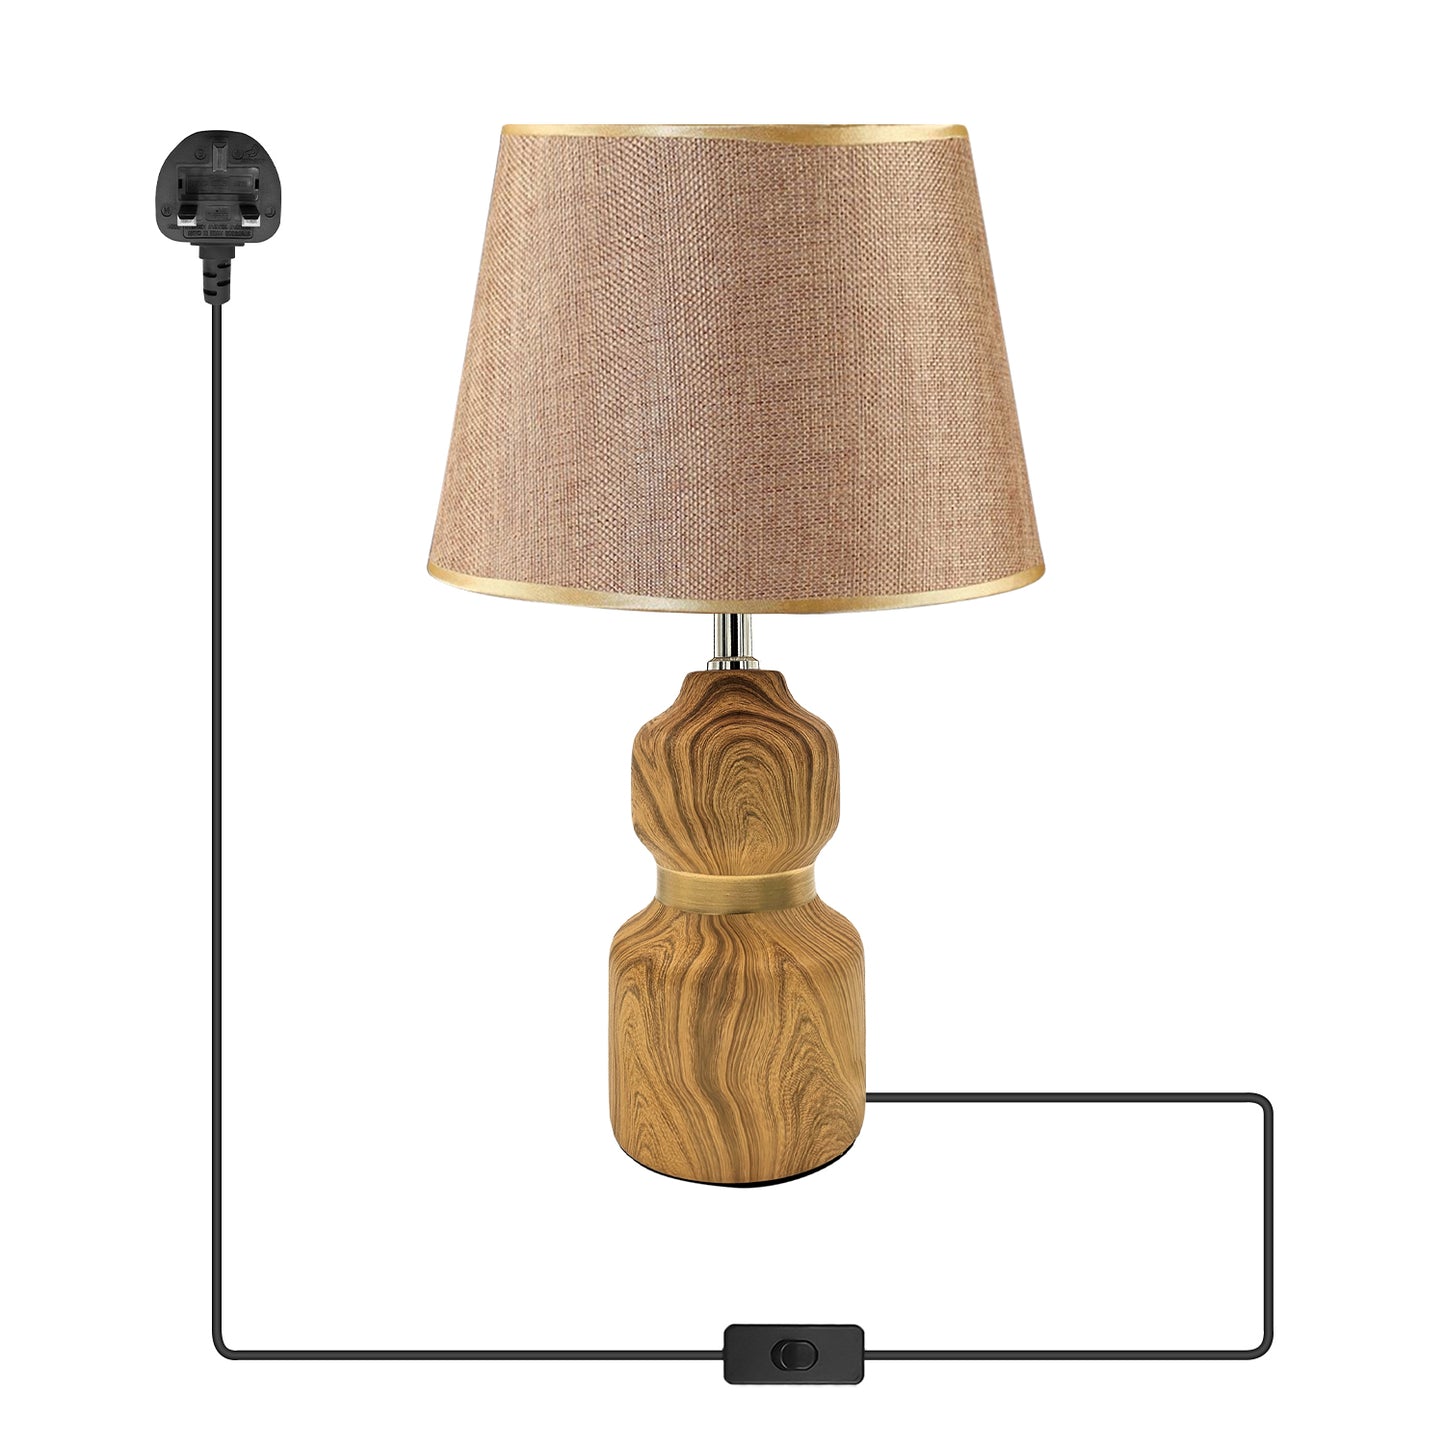 Modern Ceramic Gold Table Lamp Ideal for Bedside and Desk Use - Application Image